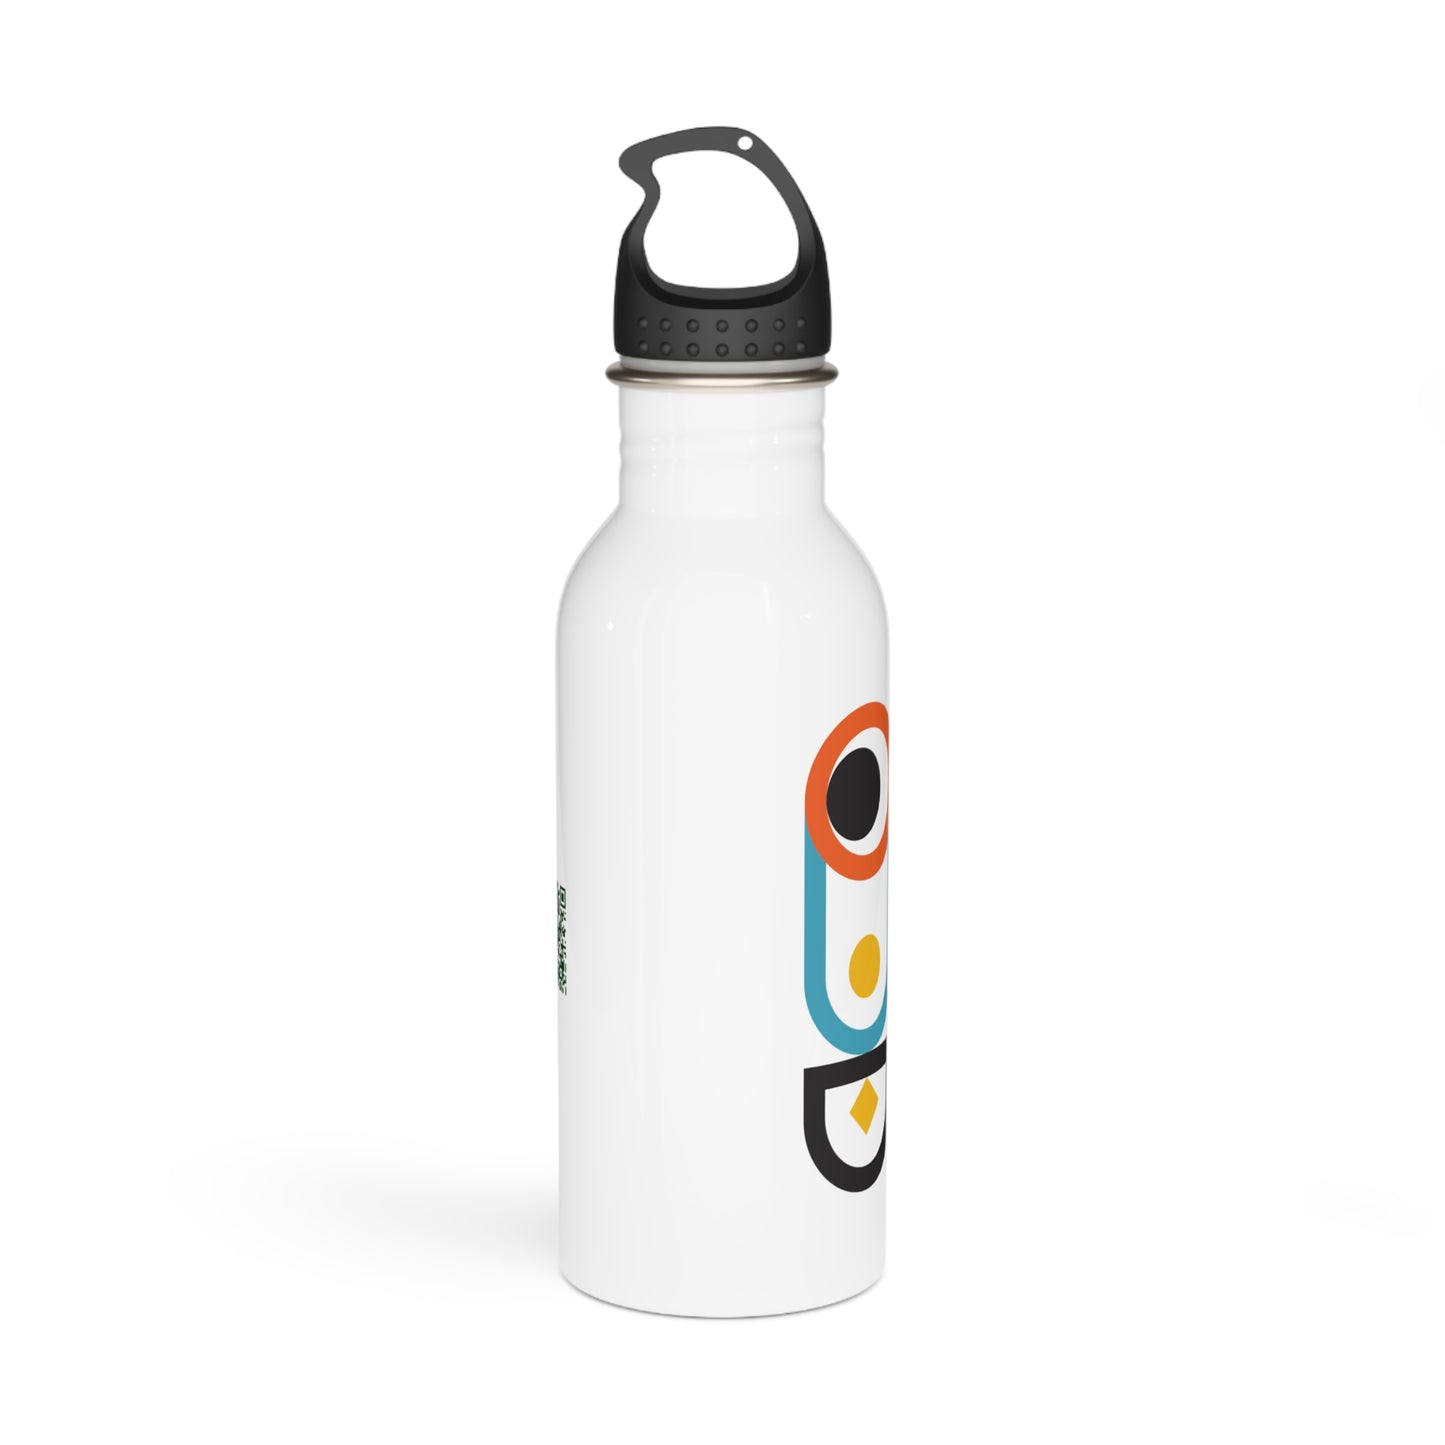 Whimsical Shapes - Stainless Steel Water Bottle